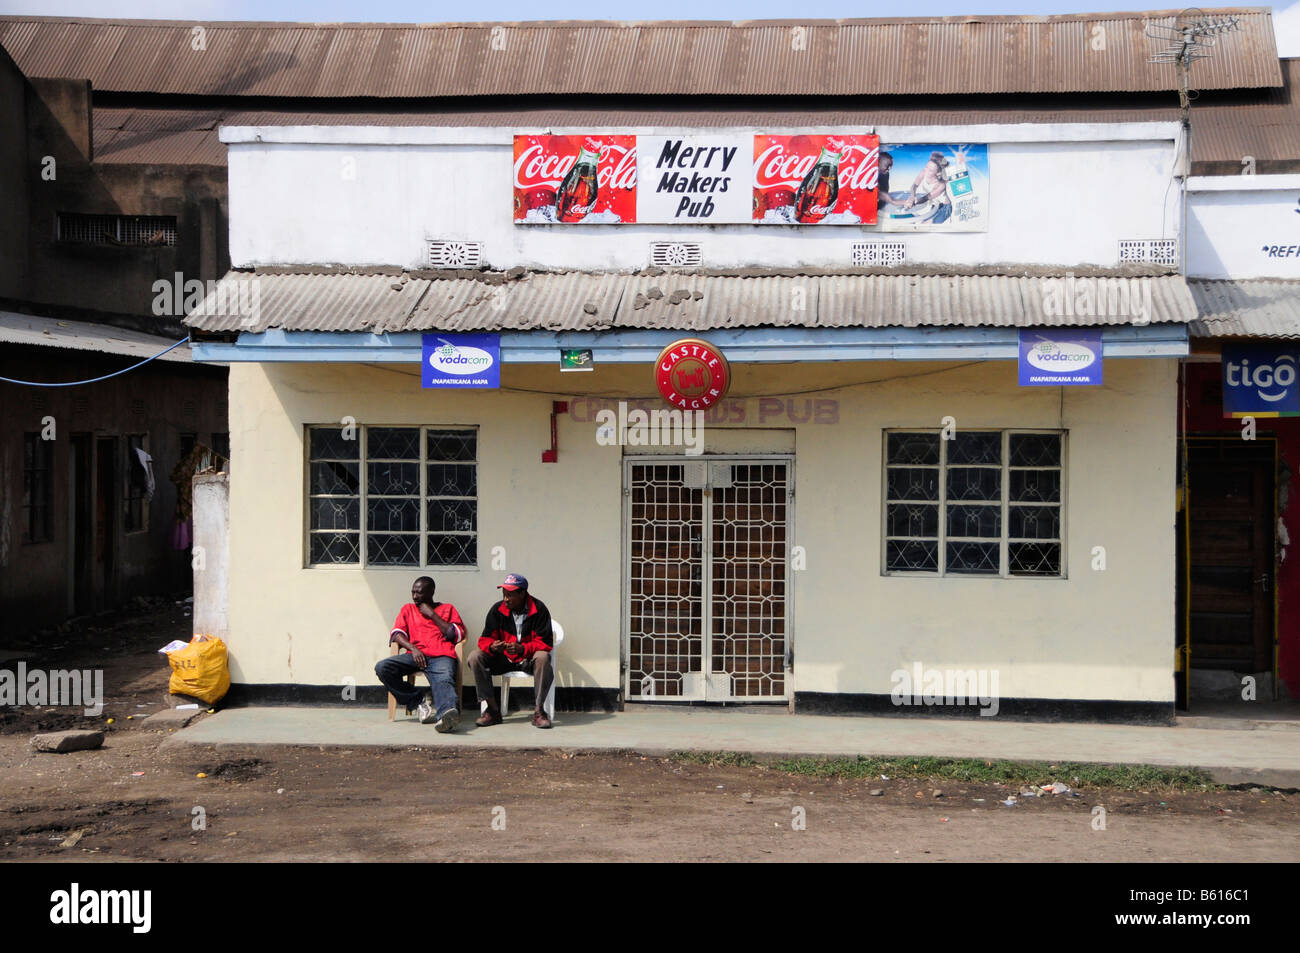 Two locals in front of a pub, Merry Makers Pub, Arusha, Tanzania, Africa Stock Photo